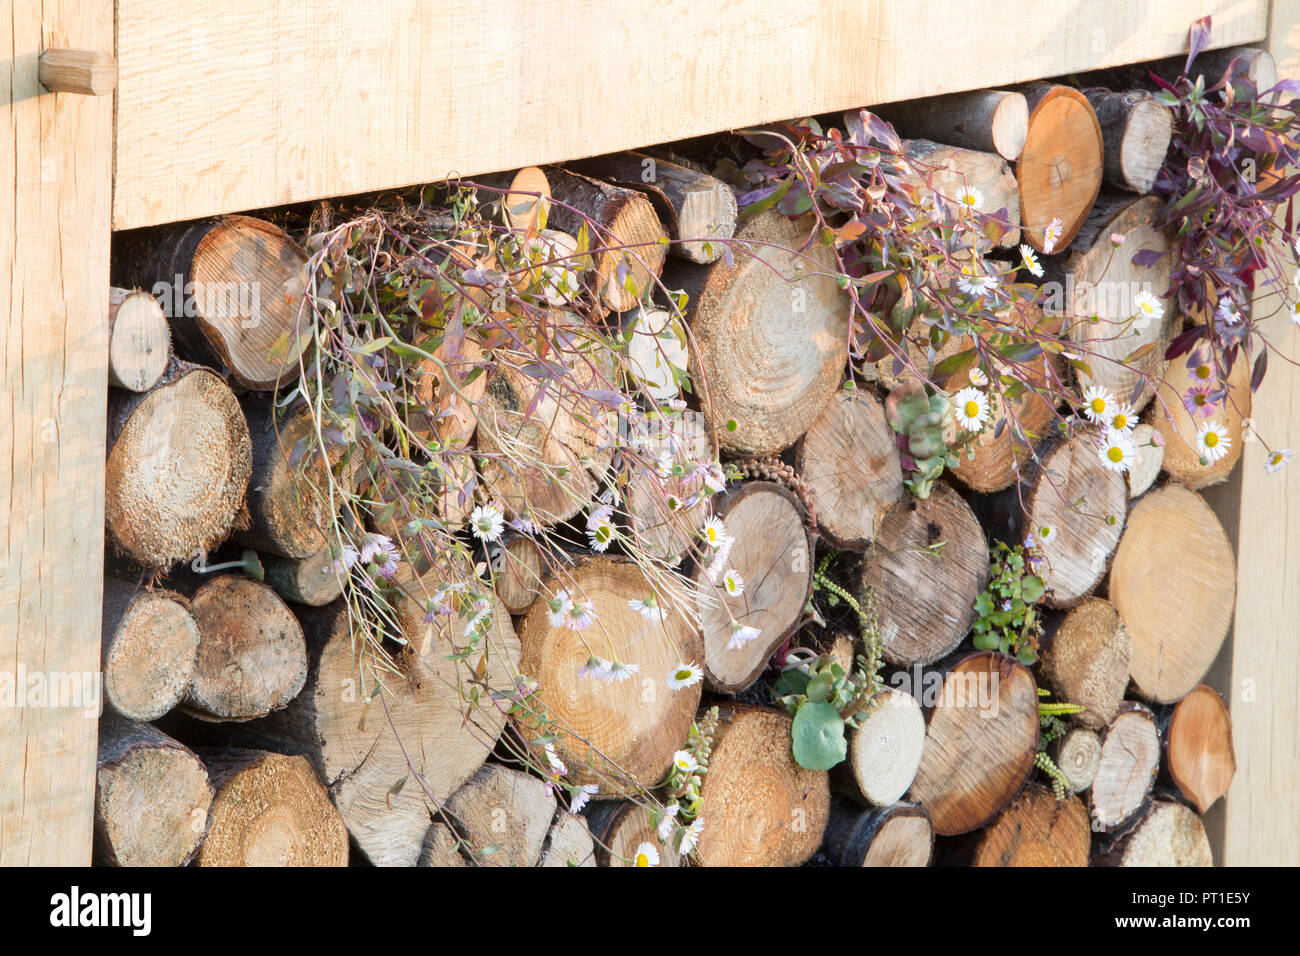 Eco Wildlife friendly Garden with insect bug hotel wall habitat Erigeron karvinskianus Mexican daisy fleabane growing in logs stored for winter UK Stock Photo